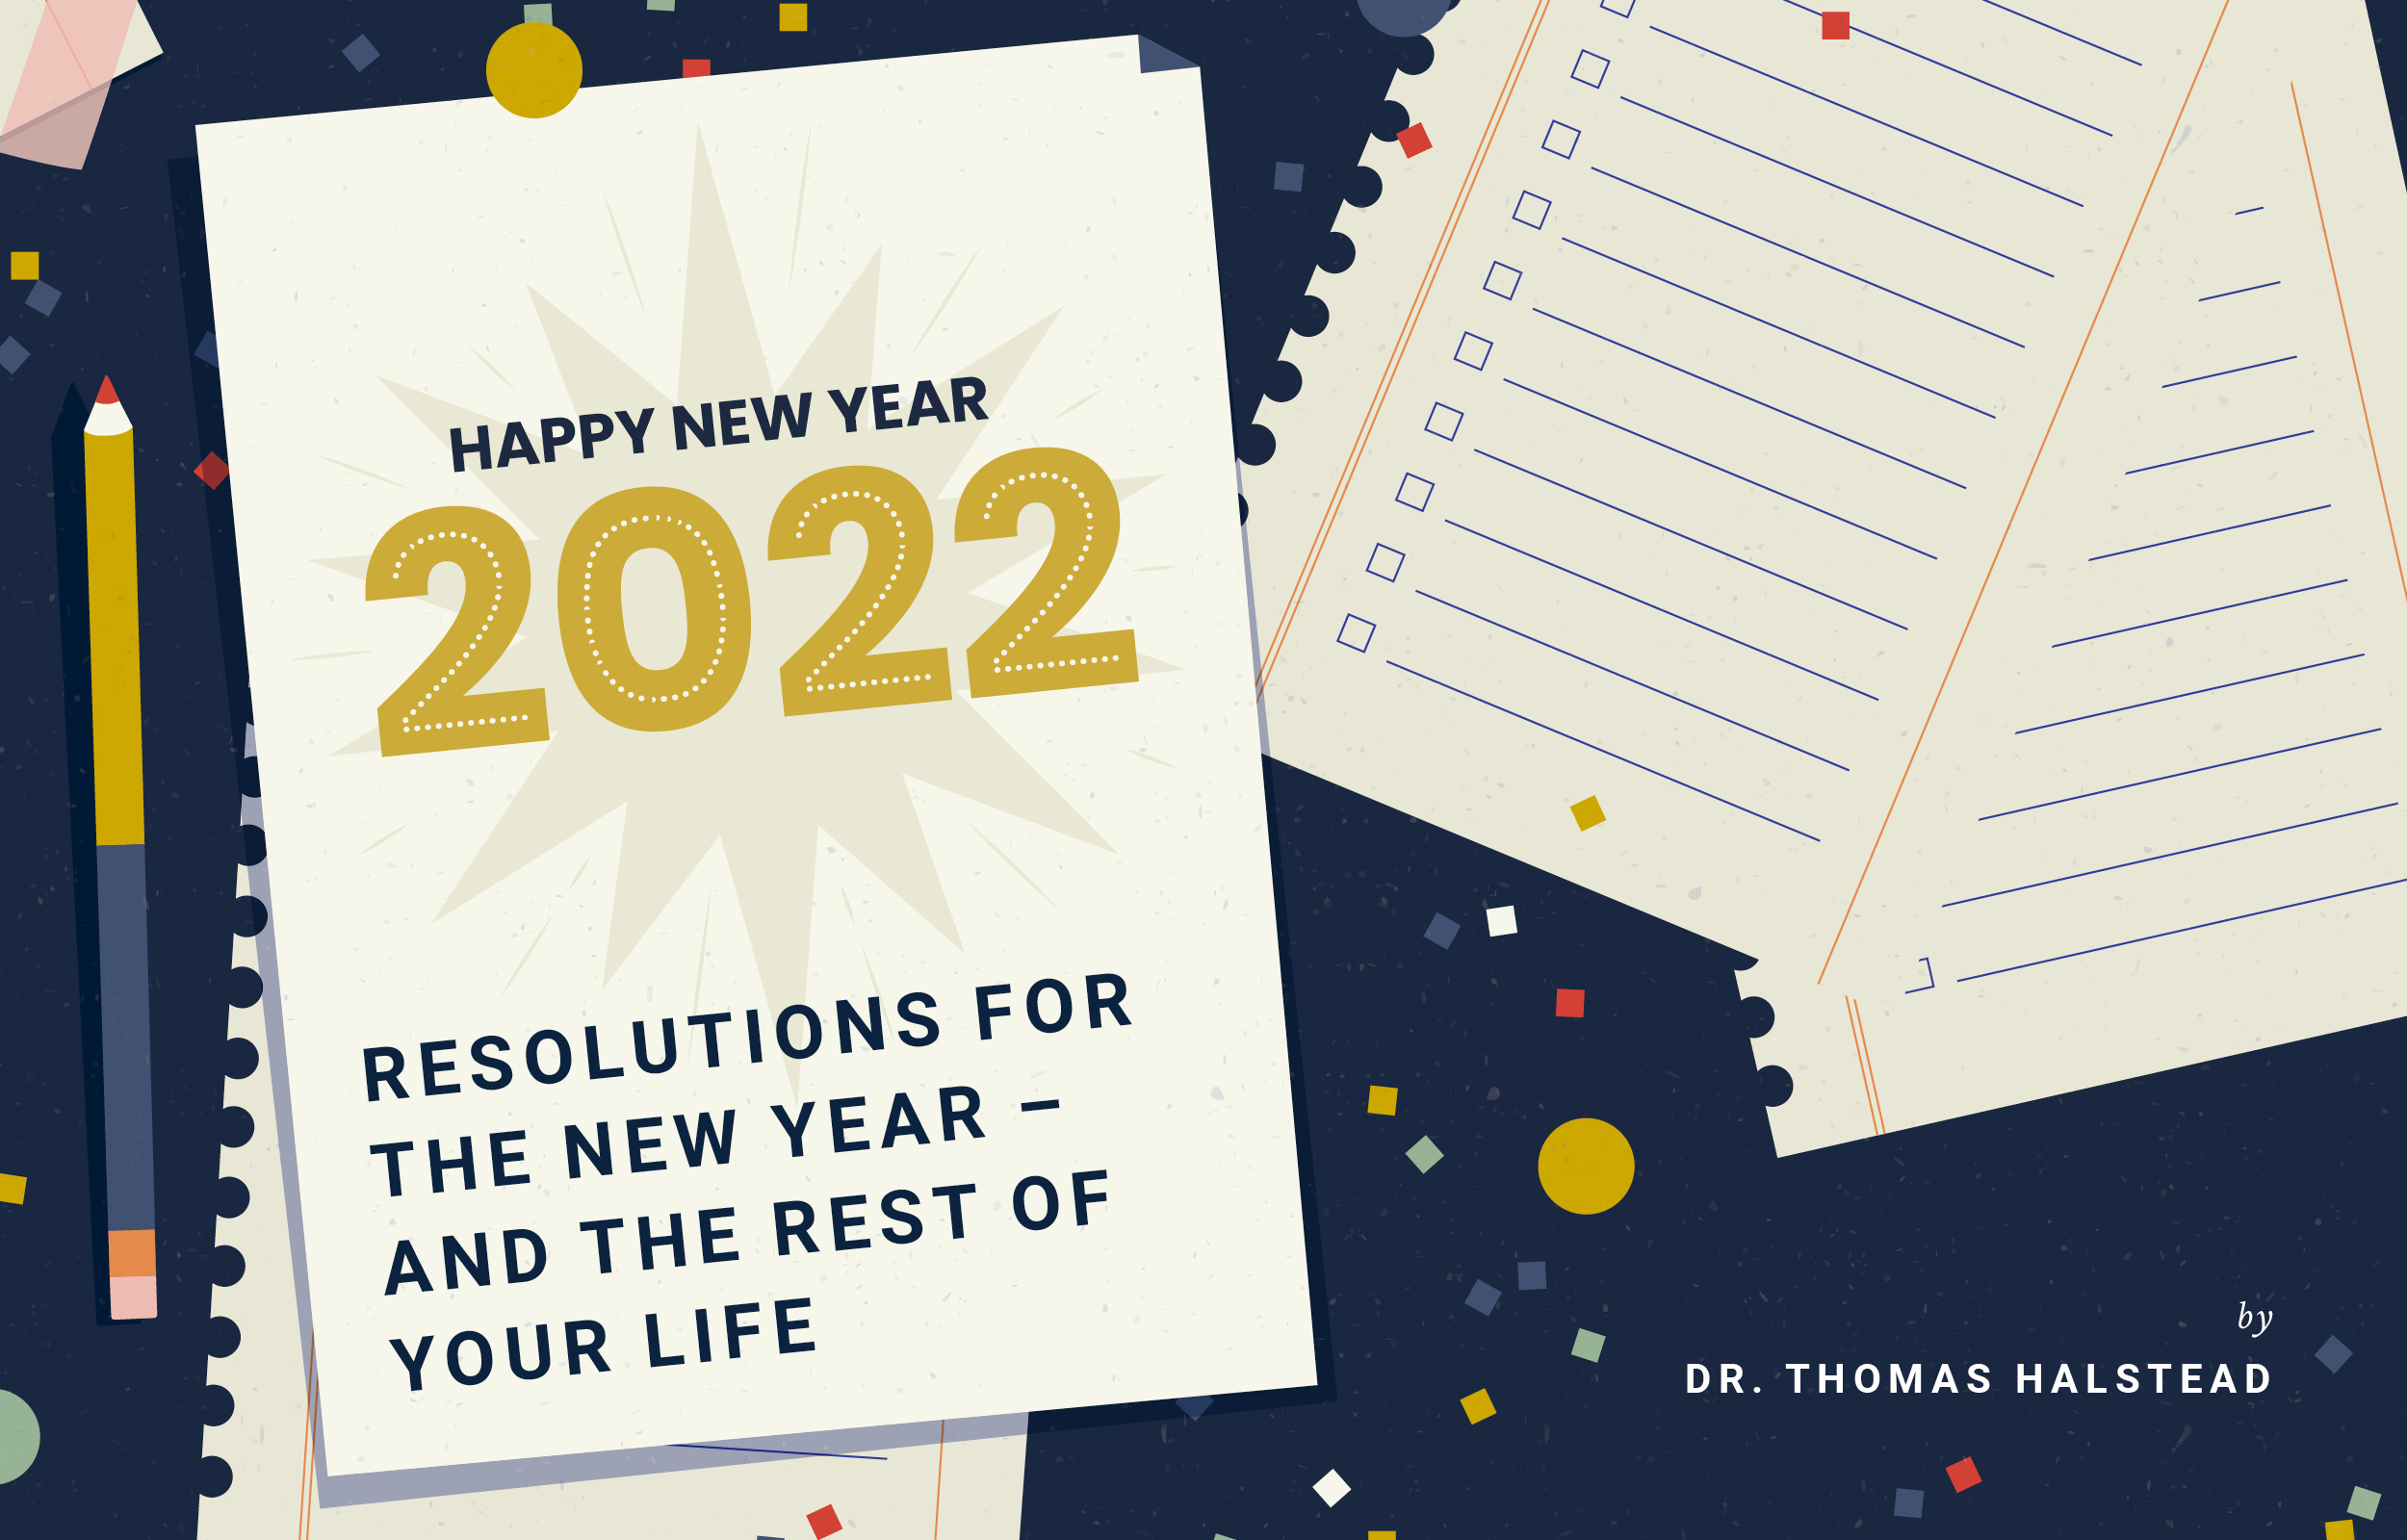 Resolutions for the New Year – and the Rest of Your Life